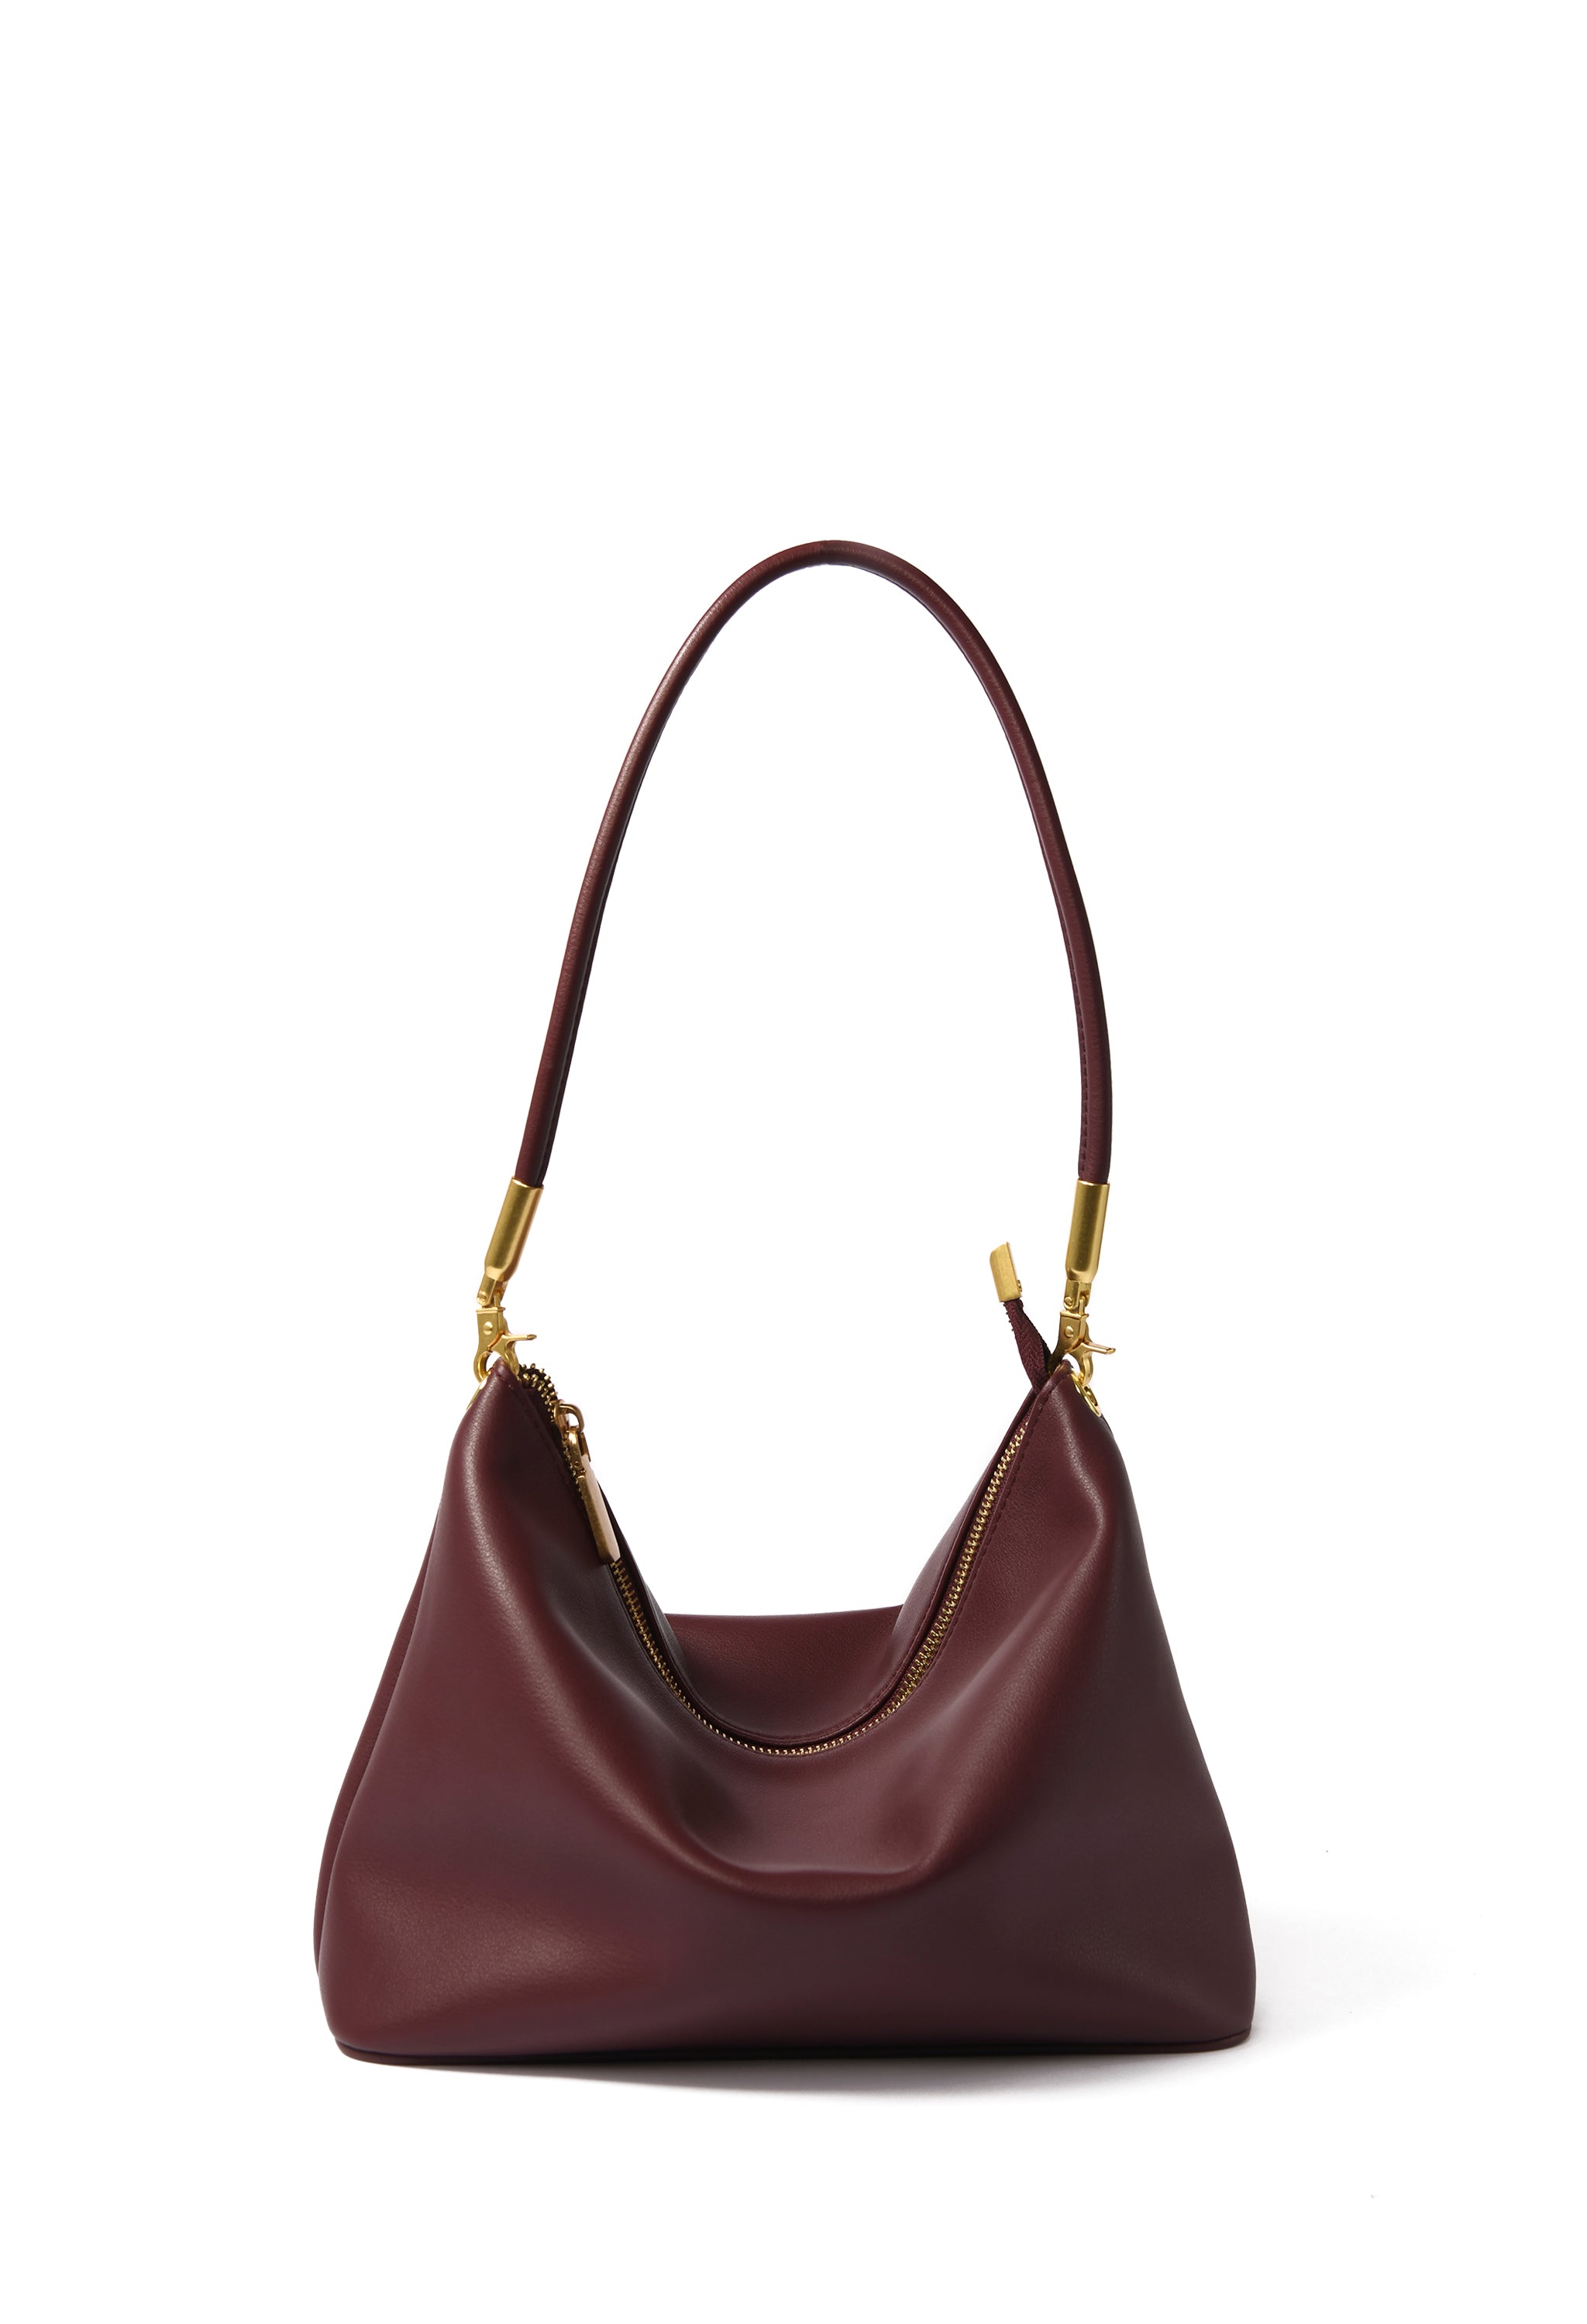 Aubrey Bag in smooth leather, Wine BOB ORE blue collection on sale 2022